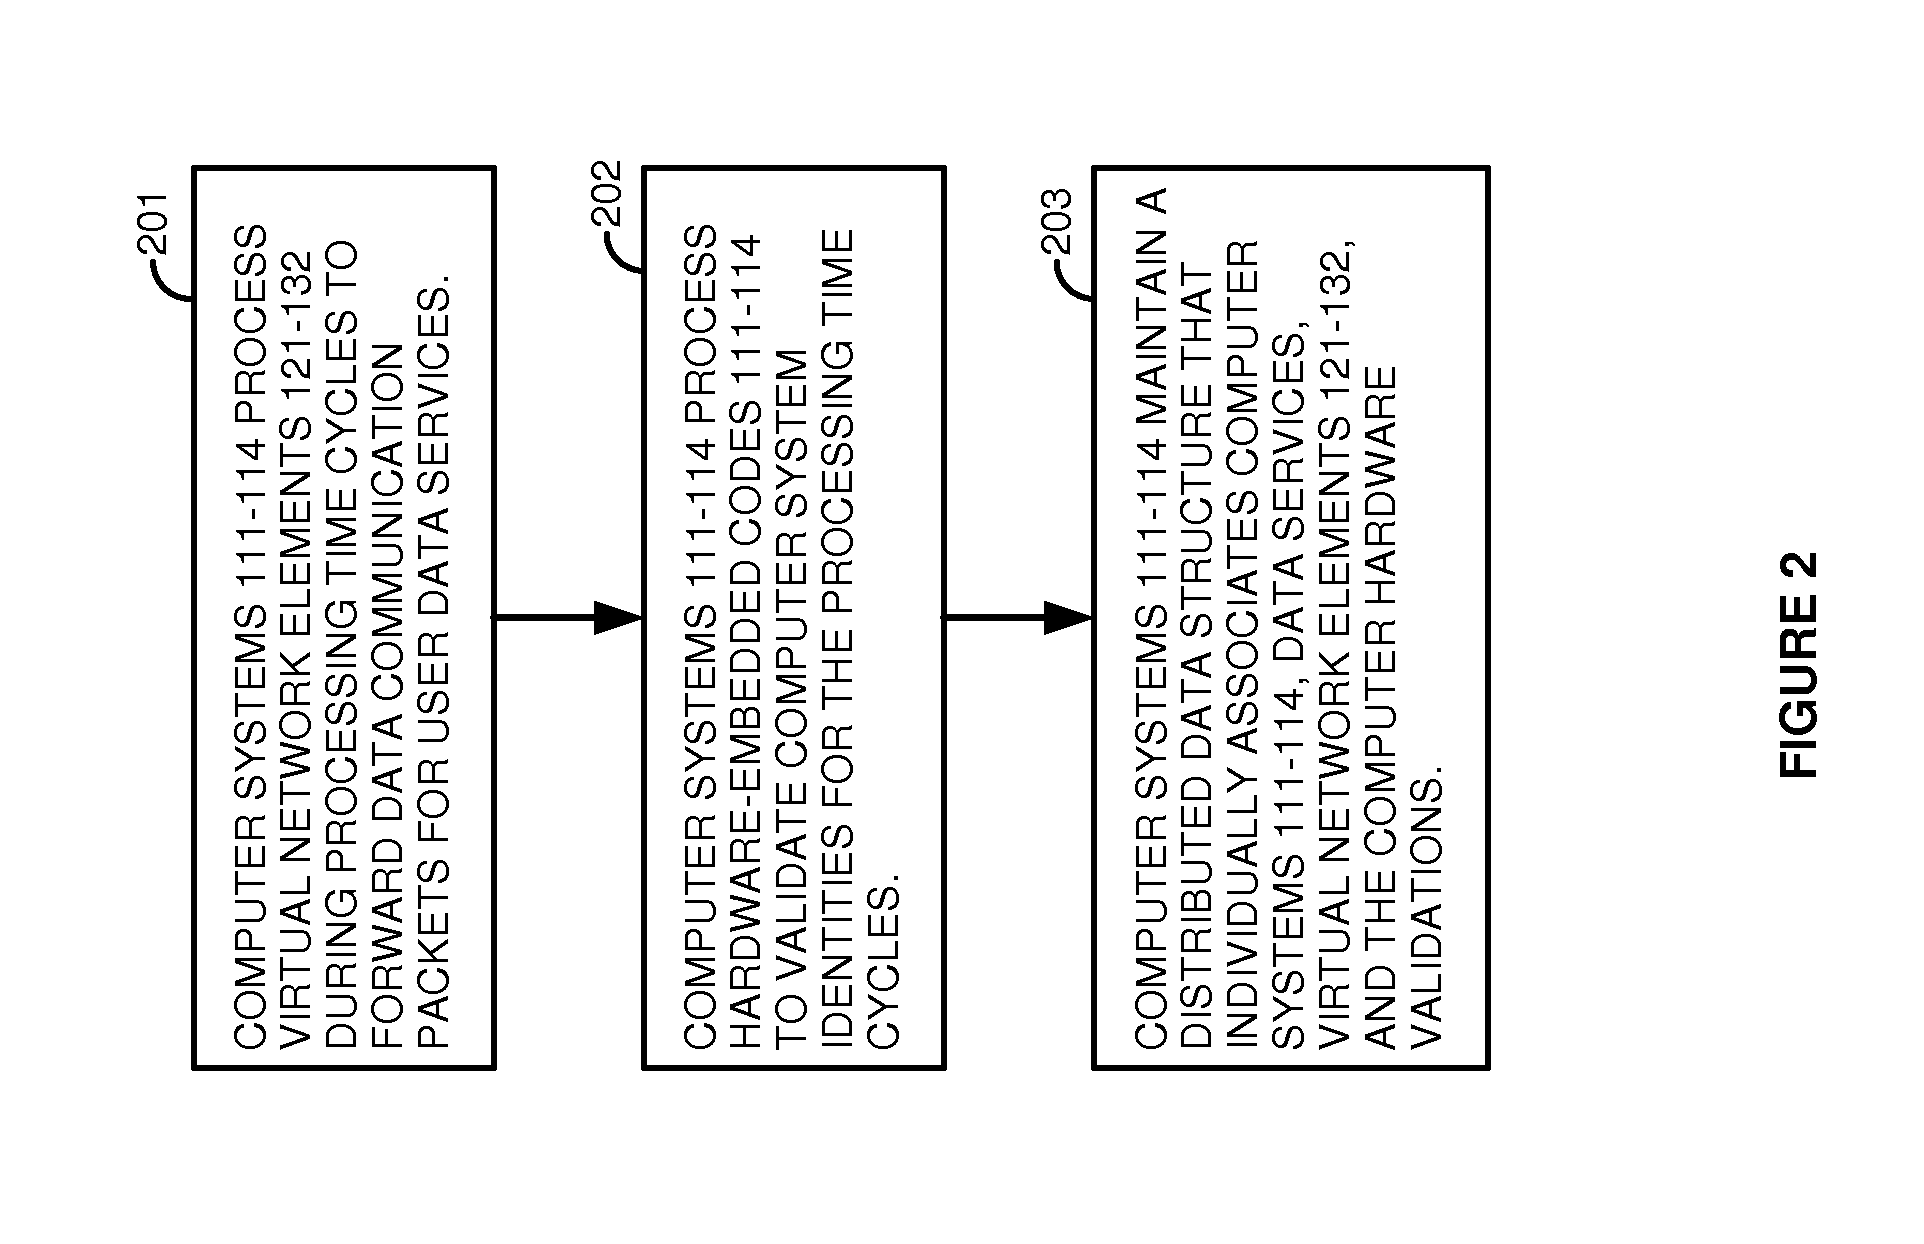 Computer system hardware validation for virtual communication network elements